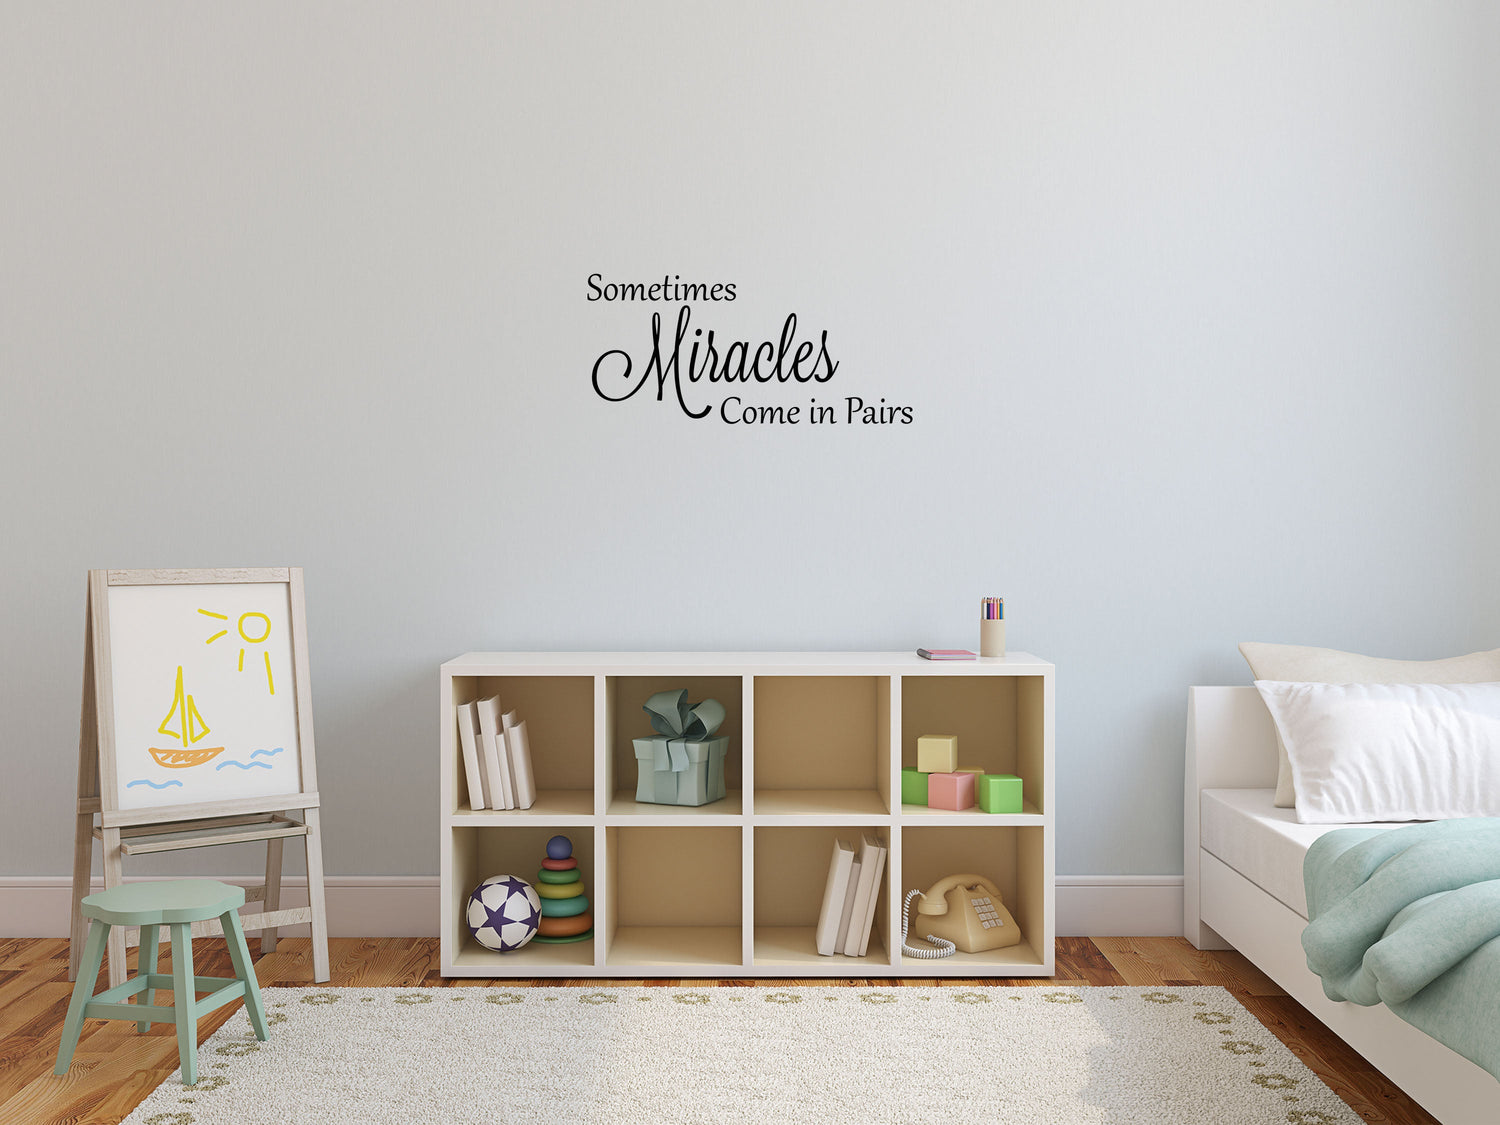 Sometimes Miracles Come In Pairs Vinyl Wall Decal - Twins Baby Gift - Twins Wall Quote - Twins Vinyl Wall Art - Vinyl Decals Twins Decal Vinyl Wall Decal Inspirational Wall Signs 